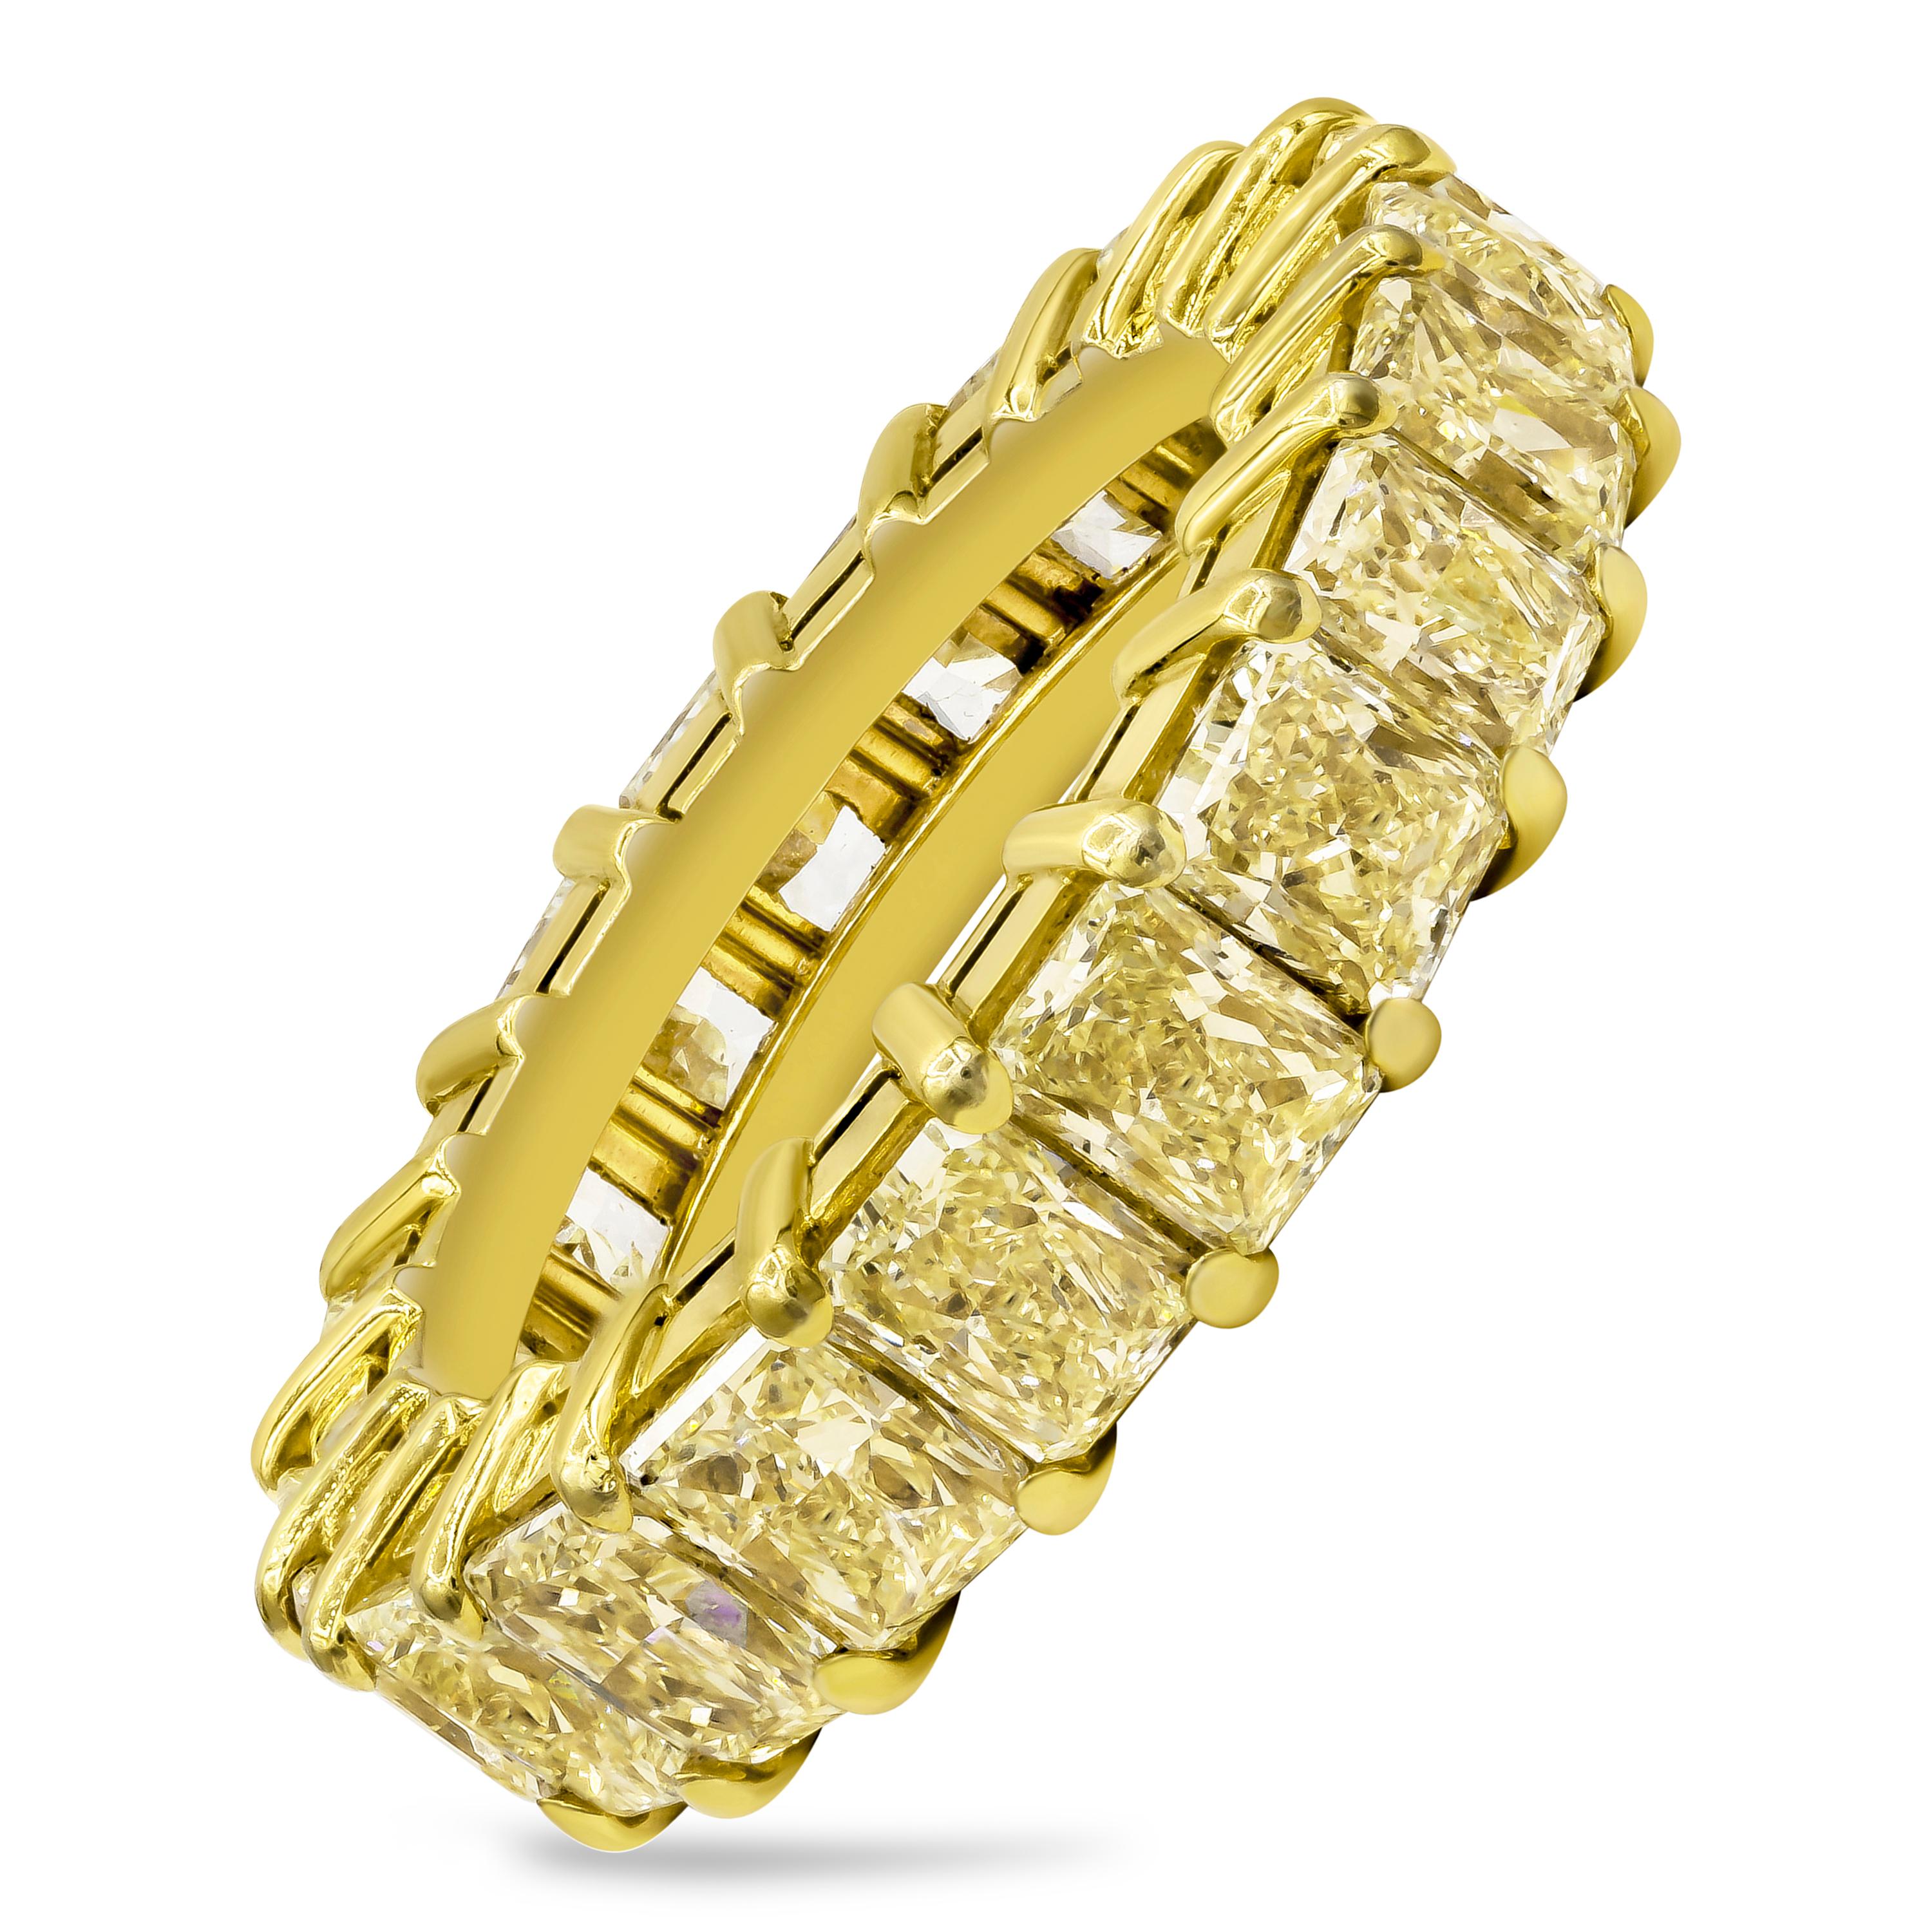 Showcasing a timeless eternity wedding band ring with natural fancy yellow diamonds weighing 7.06 carats total. Set in a classic open gallery shared prong setting made in  18K Yellow Gold, Size 6 US resizable upon request and 4.1 mm in width.